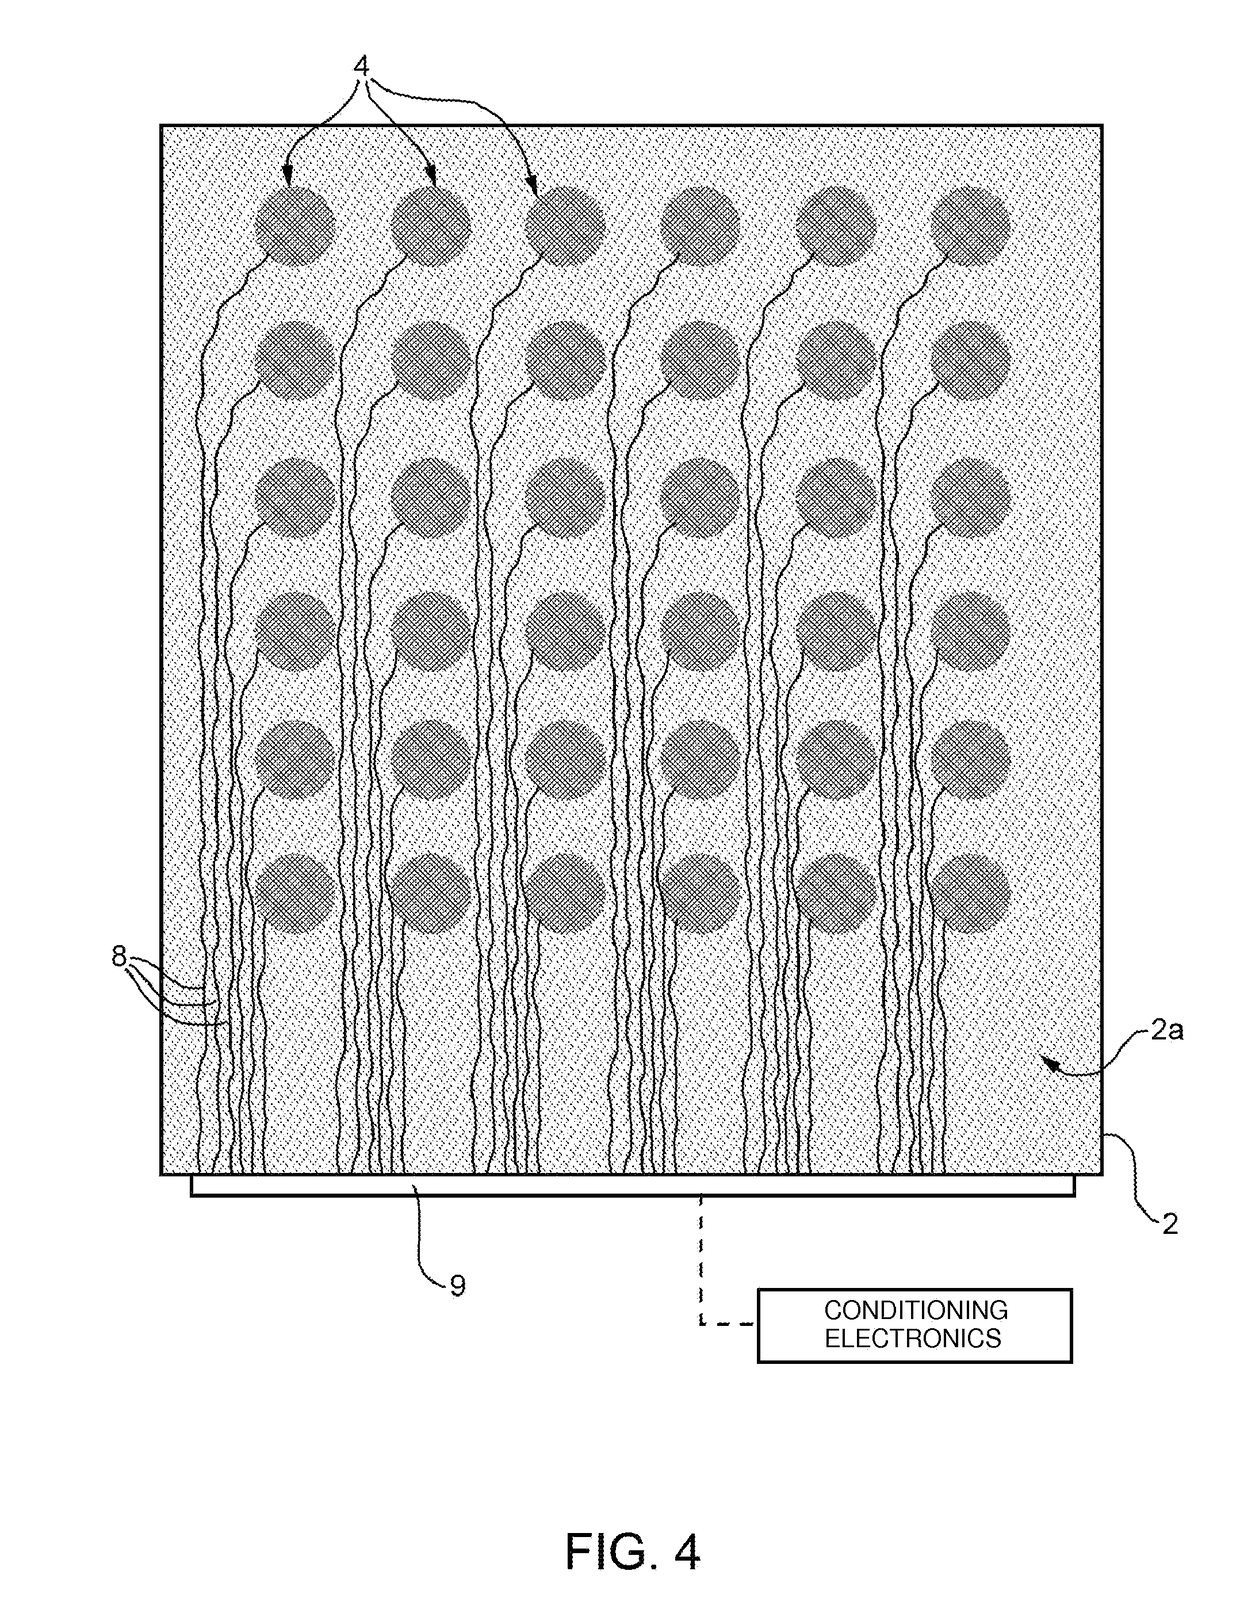 Textile electrode device for acquisition of electrophysiological signals from the skin and manufacturing process thereof